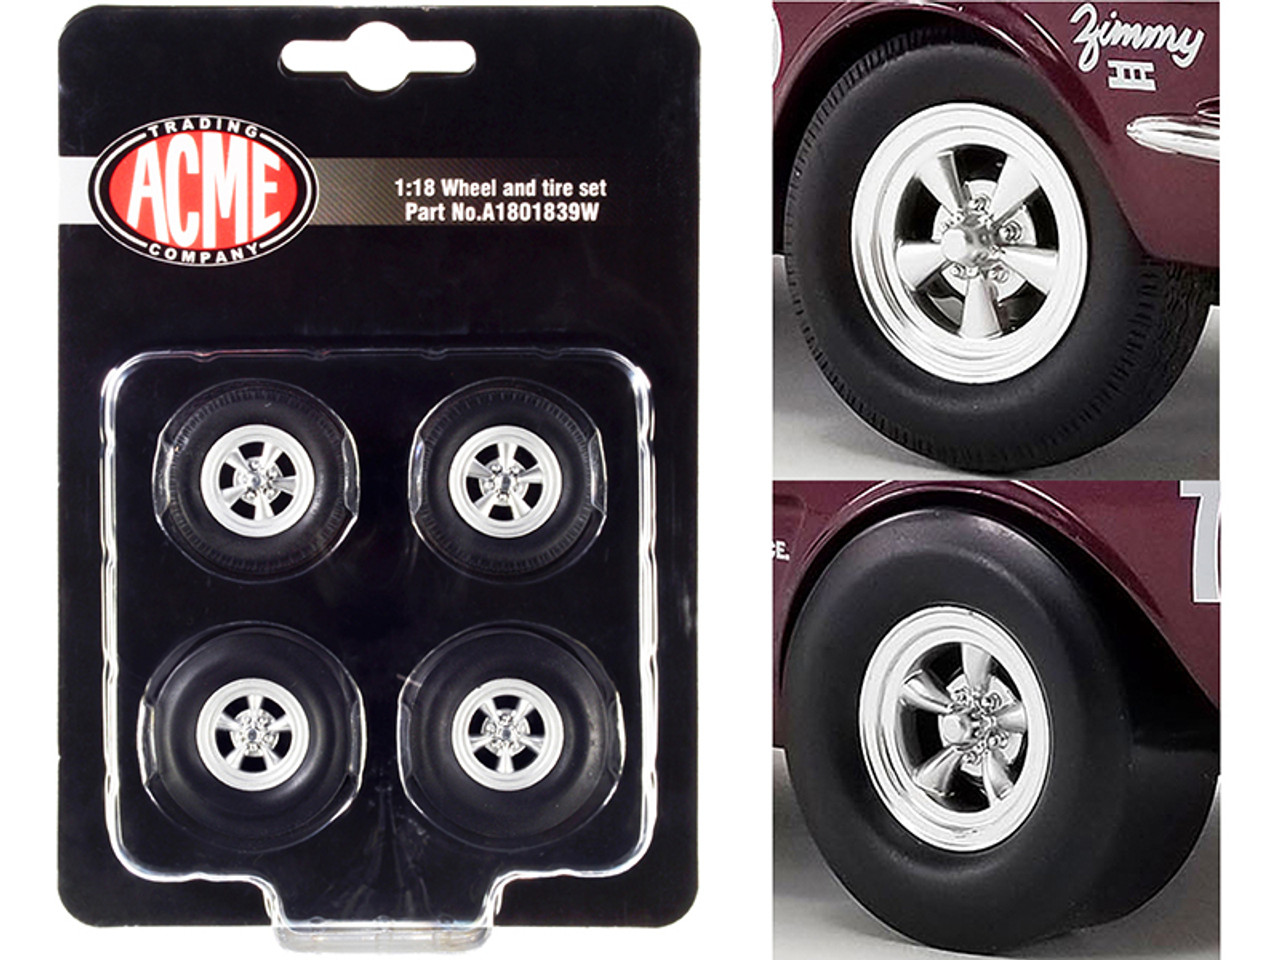 A/FX Drag Wheel and Tire Set of 4 pieces from "1965 Ford Mustang A/FX Bill Lawton "Tasca Ford" 1/18 by ACME